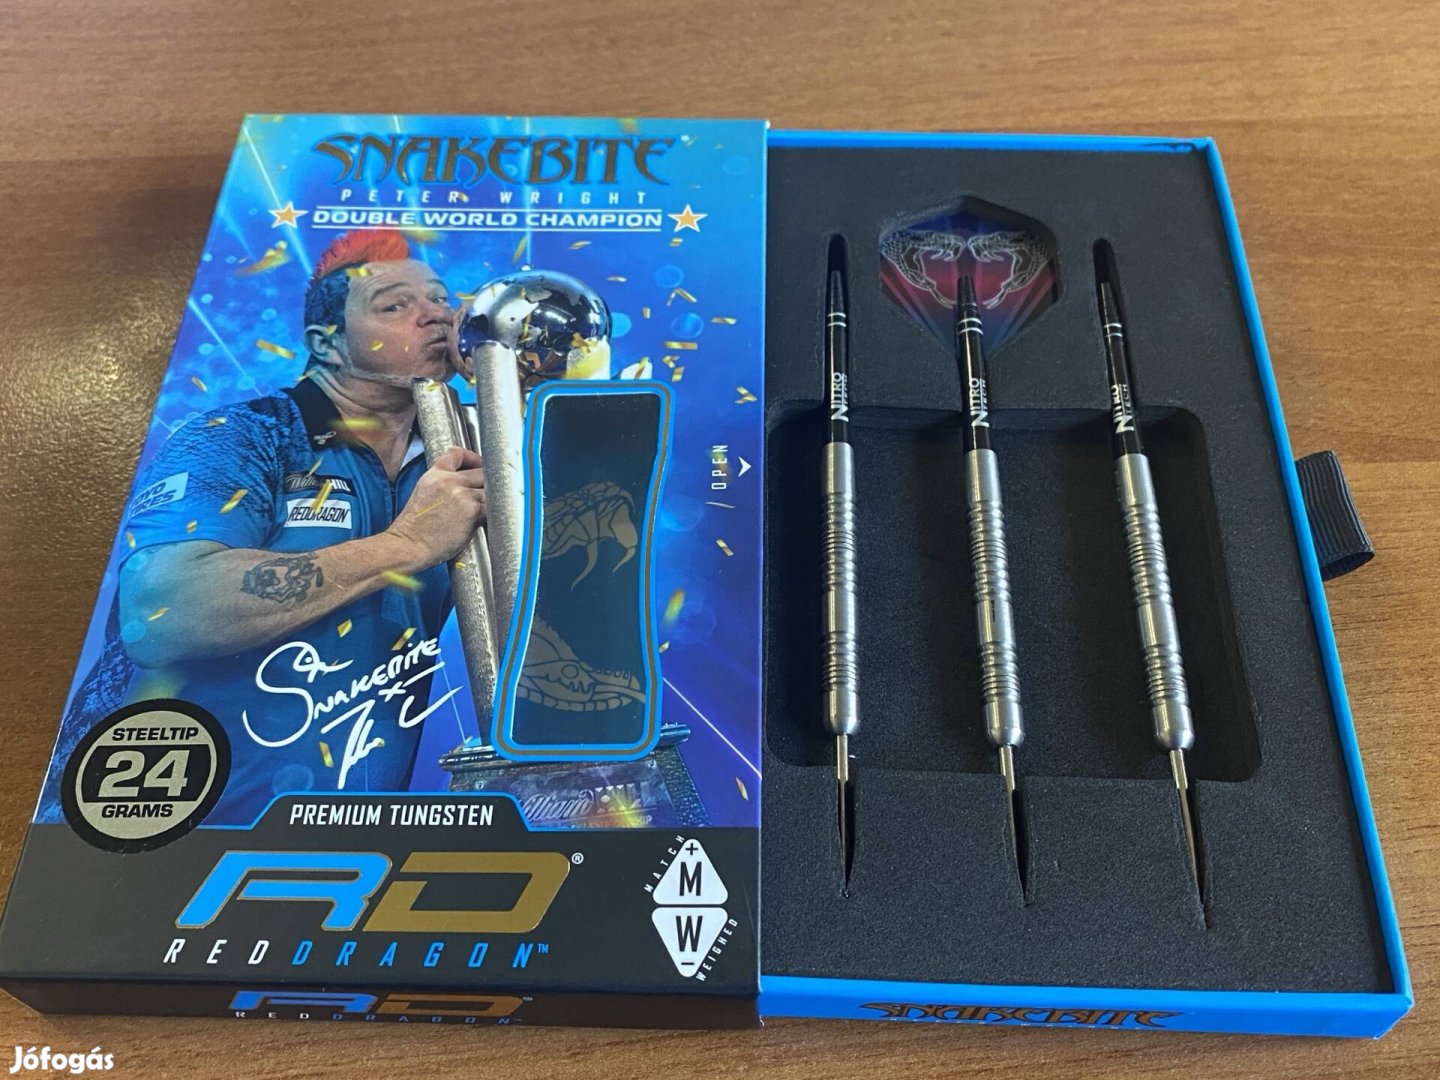 Red Dragon Peter Wright Snakebite Euro 11 - 24g steel tip darts